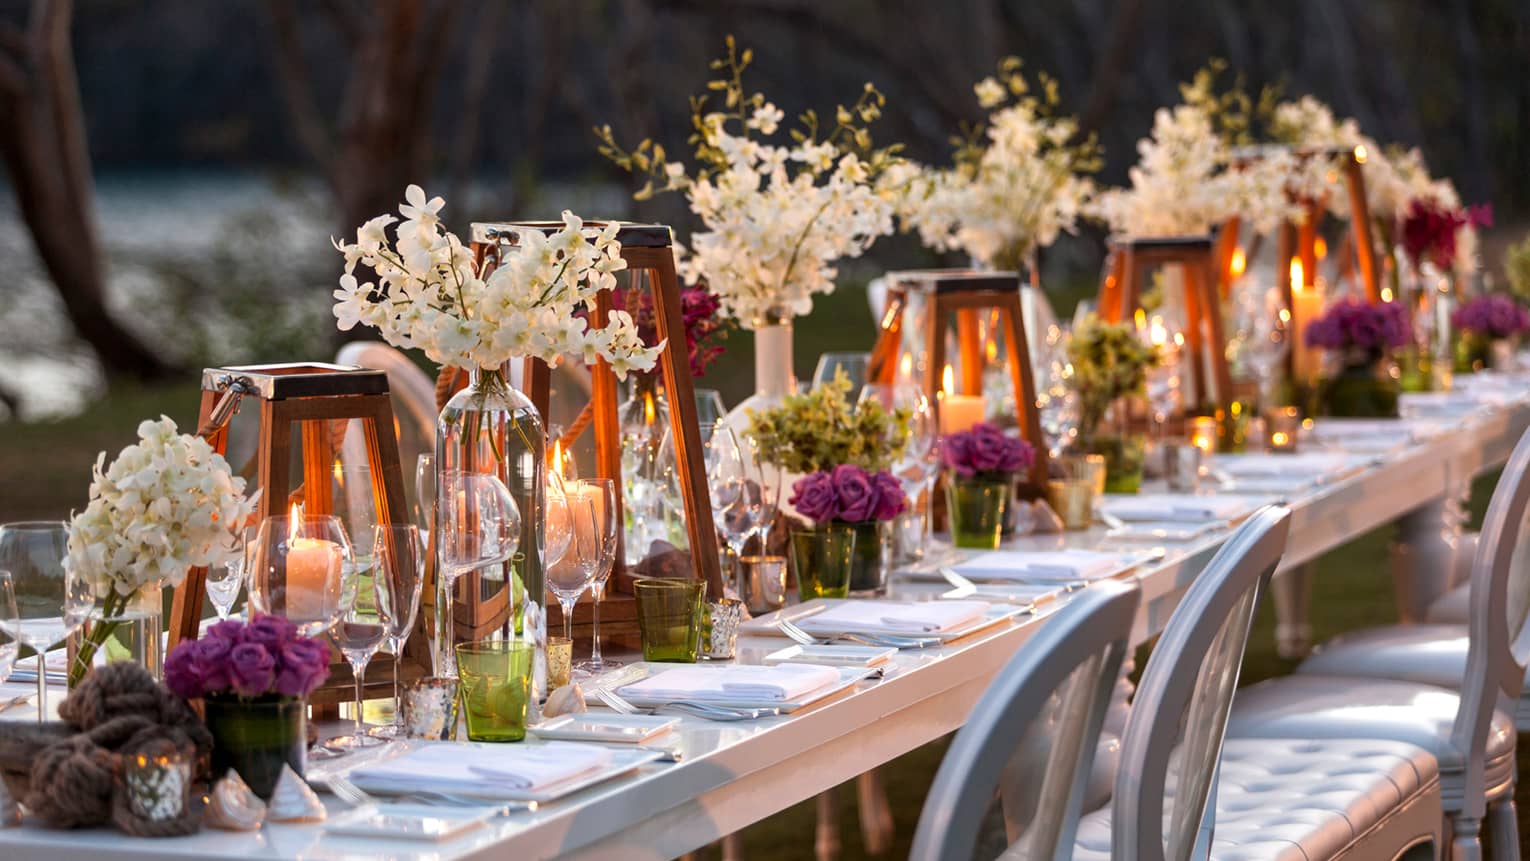 Long outdoor dining table with glowing candles in glass lanterns, white and purple flowers 